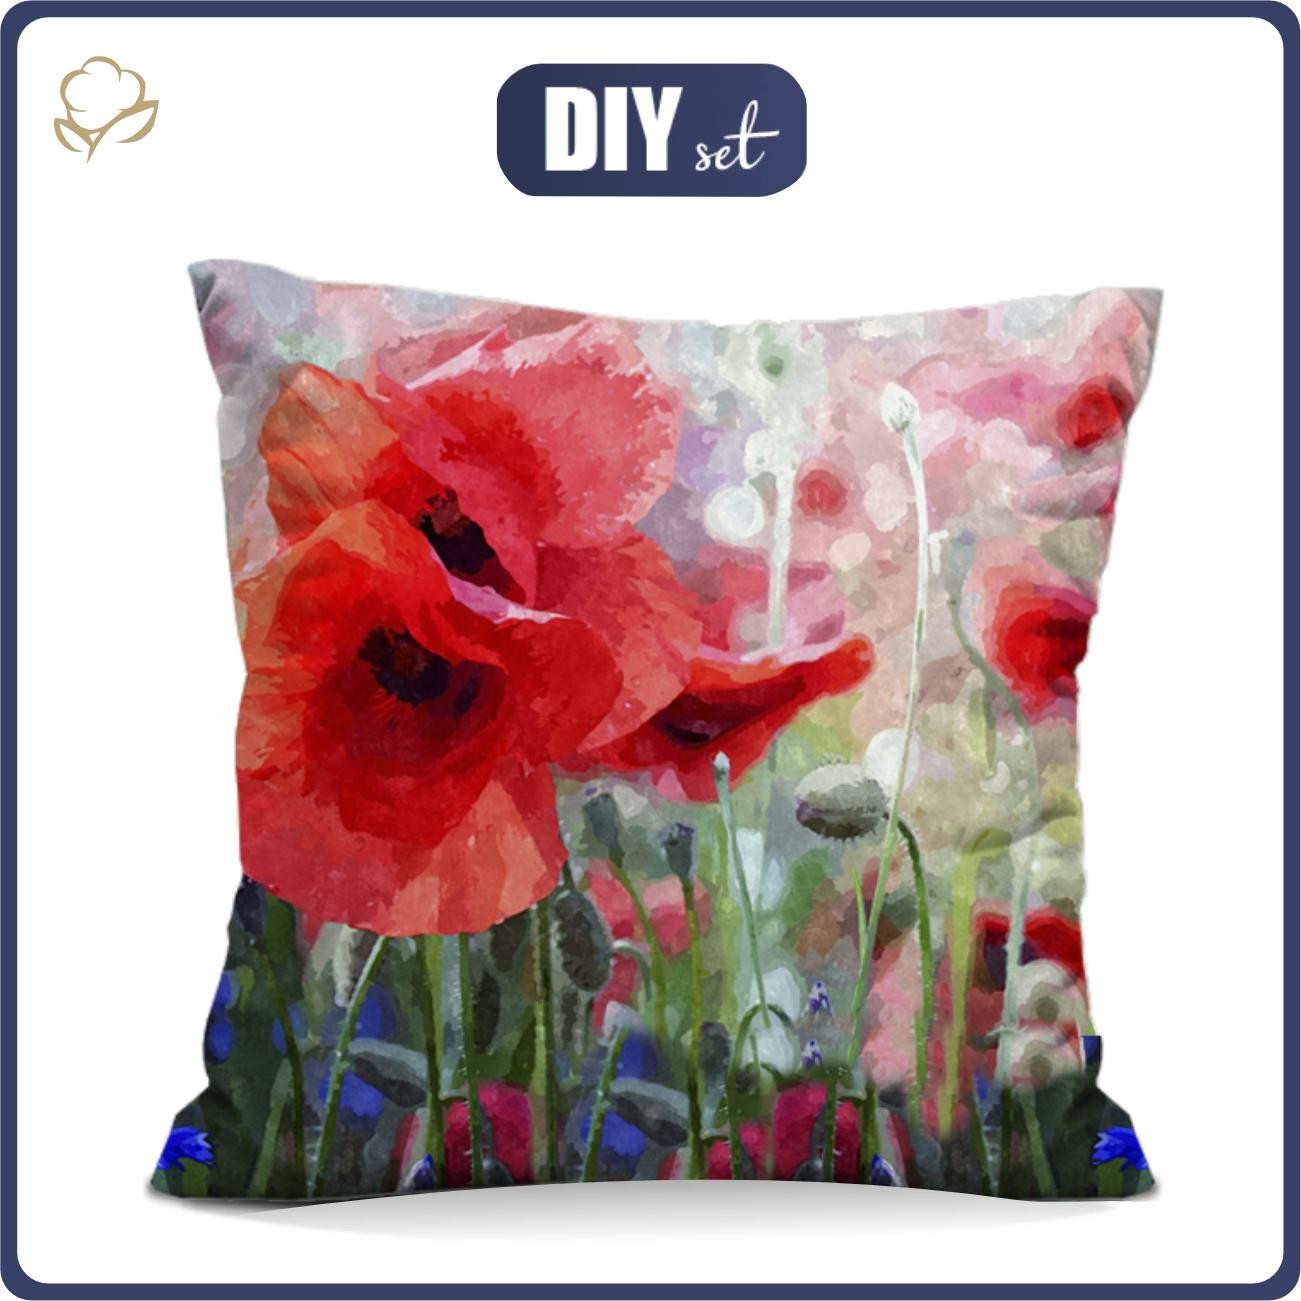 PILLOW 45X45 - POPPIES pat. 1 - Cotton woven fabric - sewing set